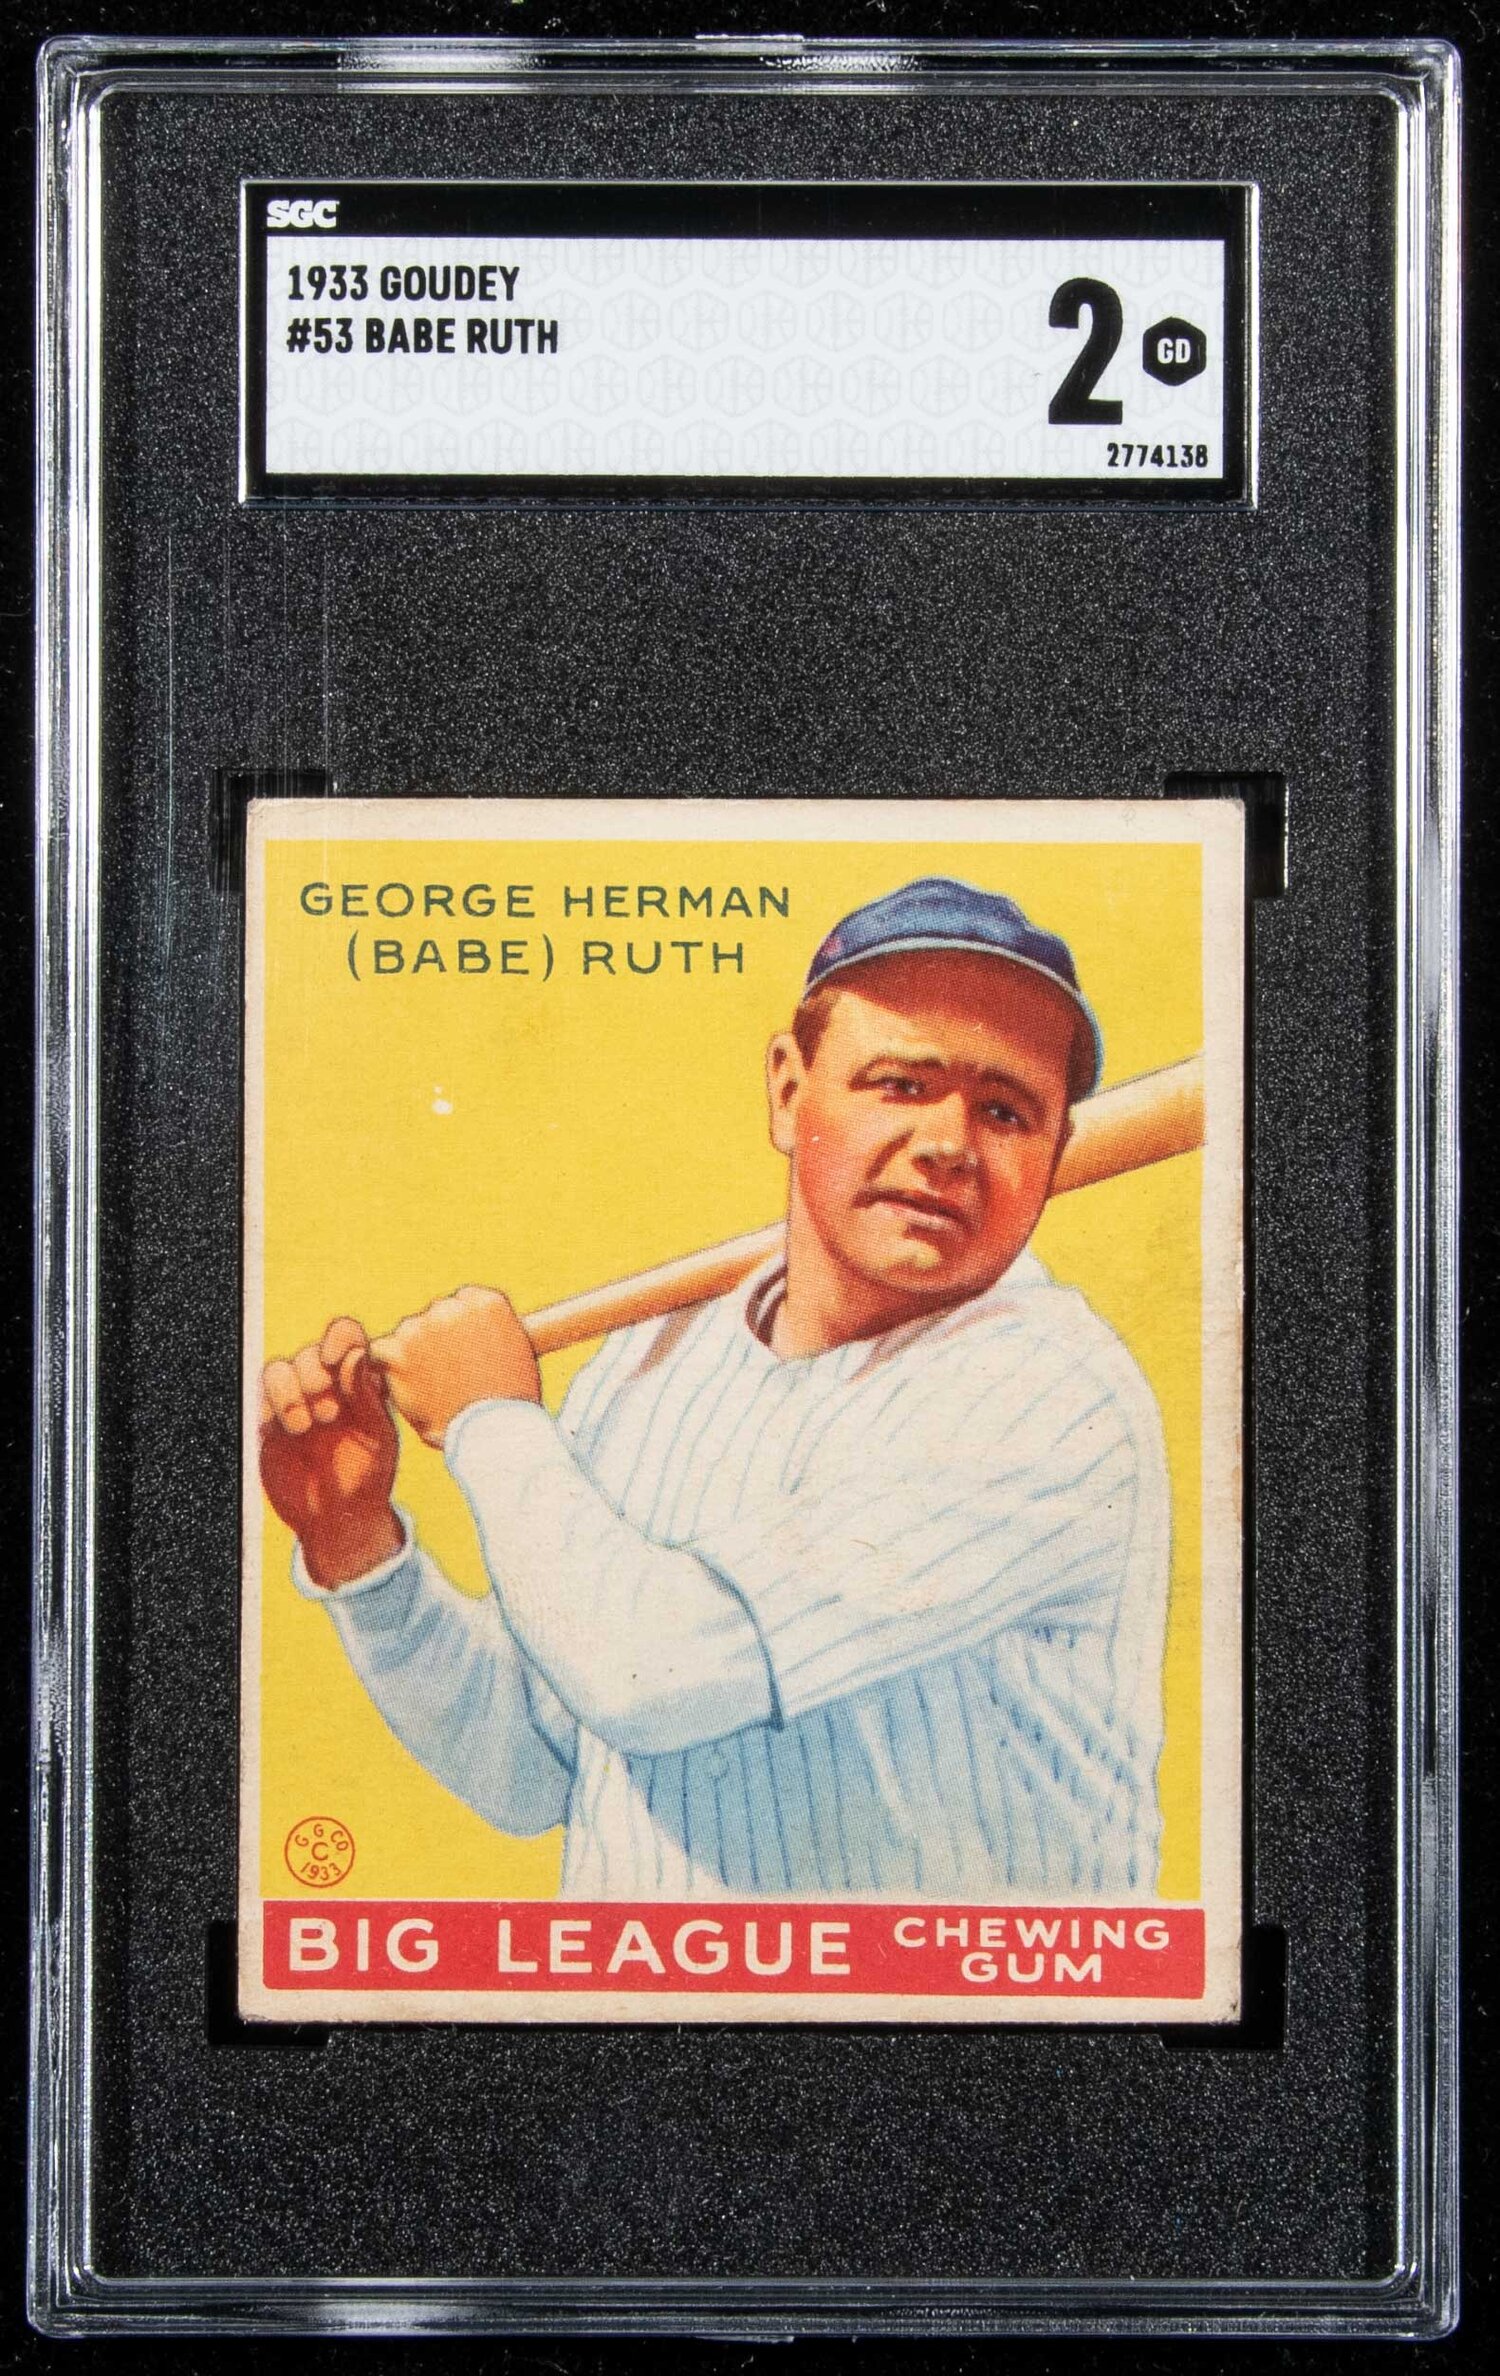 Babe Ruth Youthful Delinquent | LiveAuctionTalk